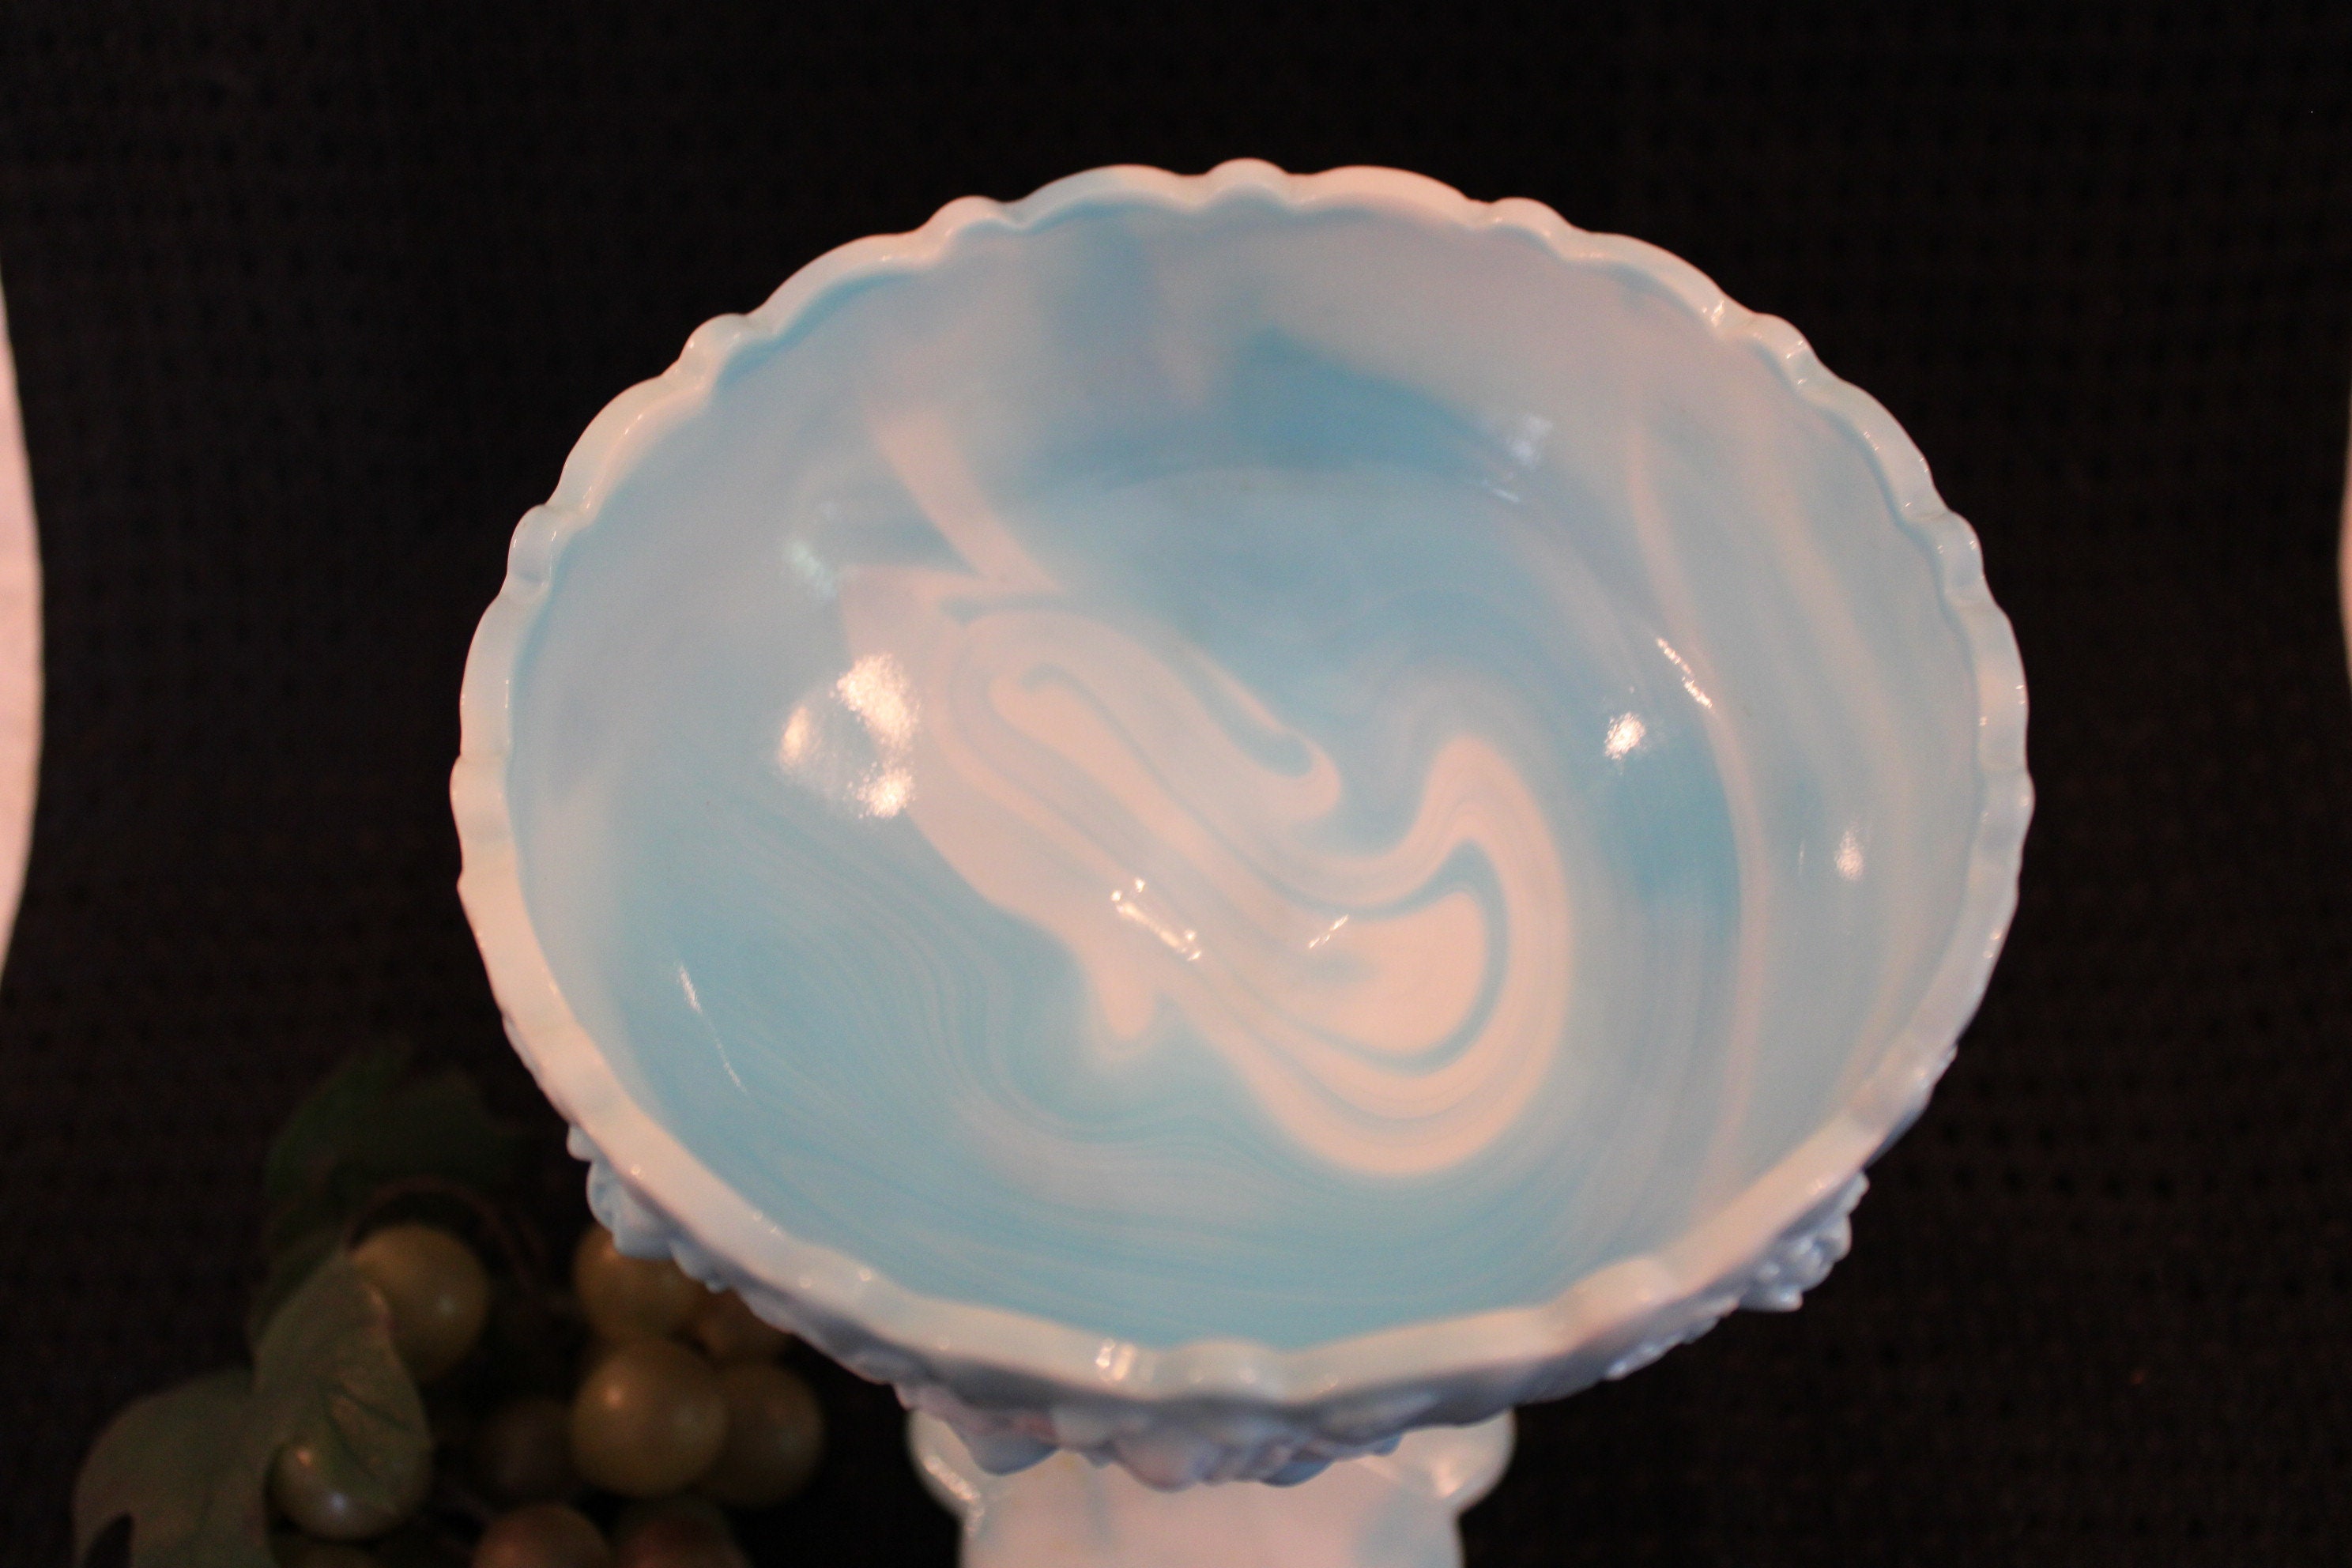 Fenton Art Glass Rose Pattern 7.5 Pedestal Compote or Candy Dish Excellent Condition! Blue Marble Milk Glass